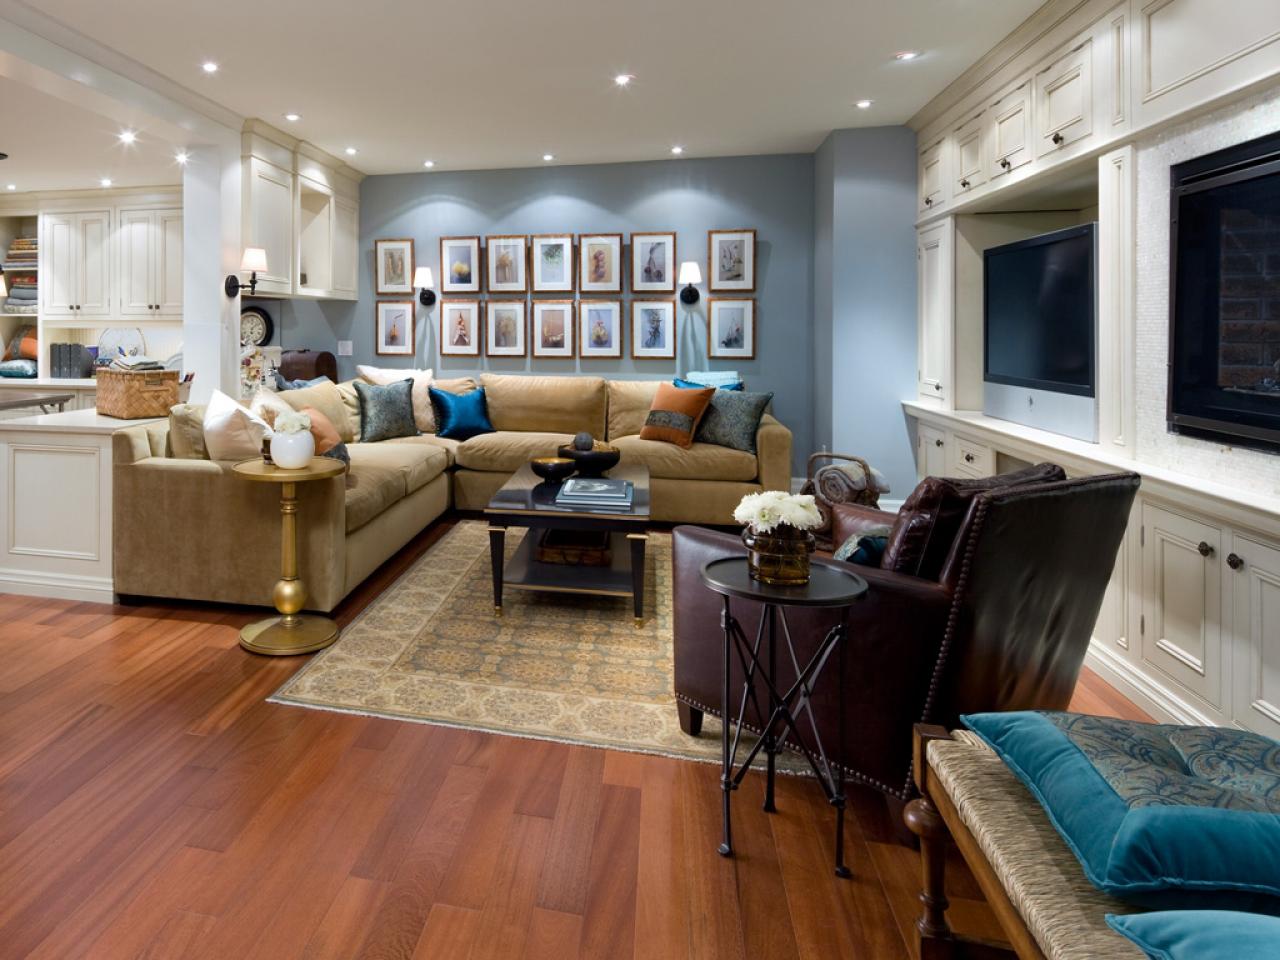 Wood Flooring In The Basement, Decorating With Hardwood Floors